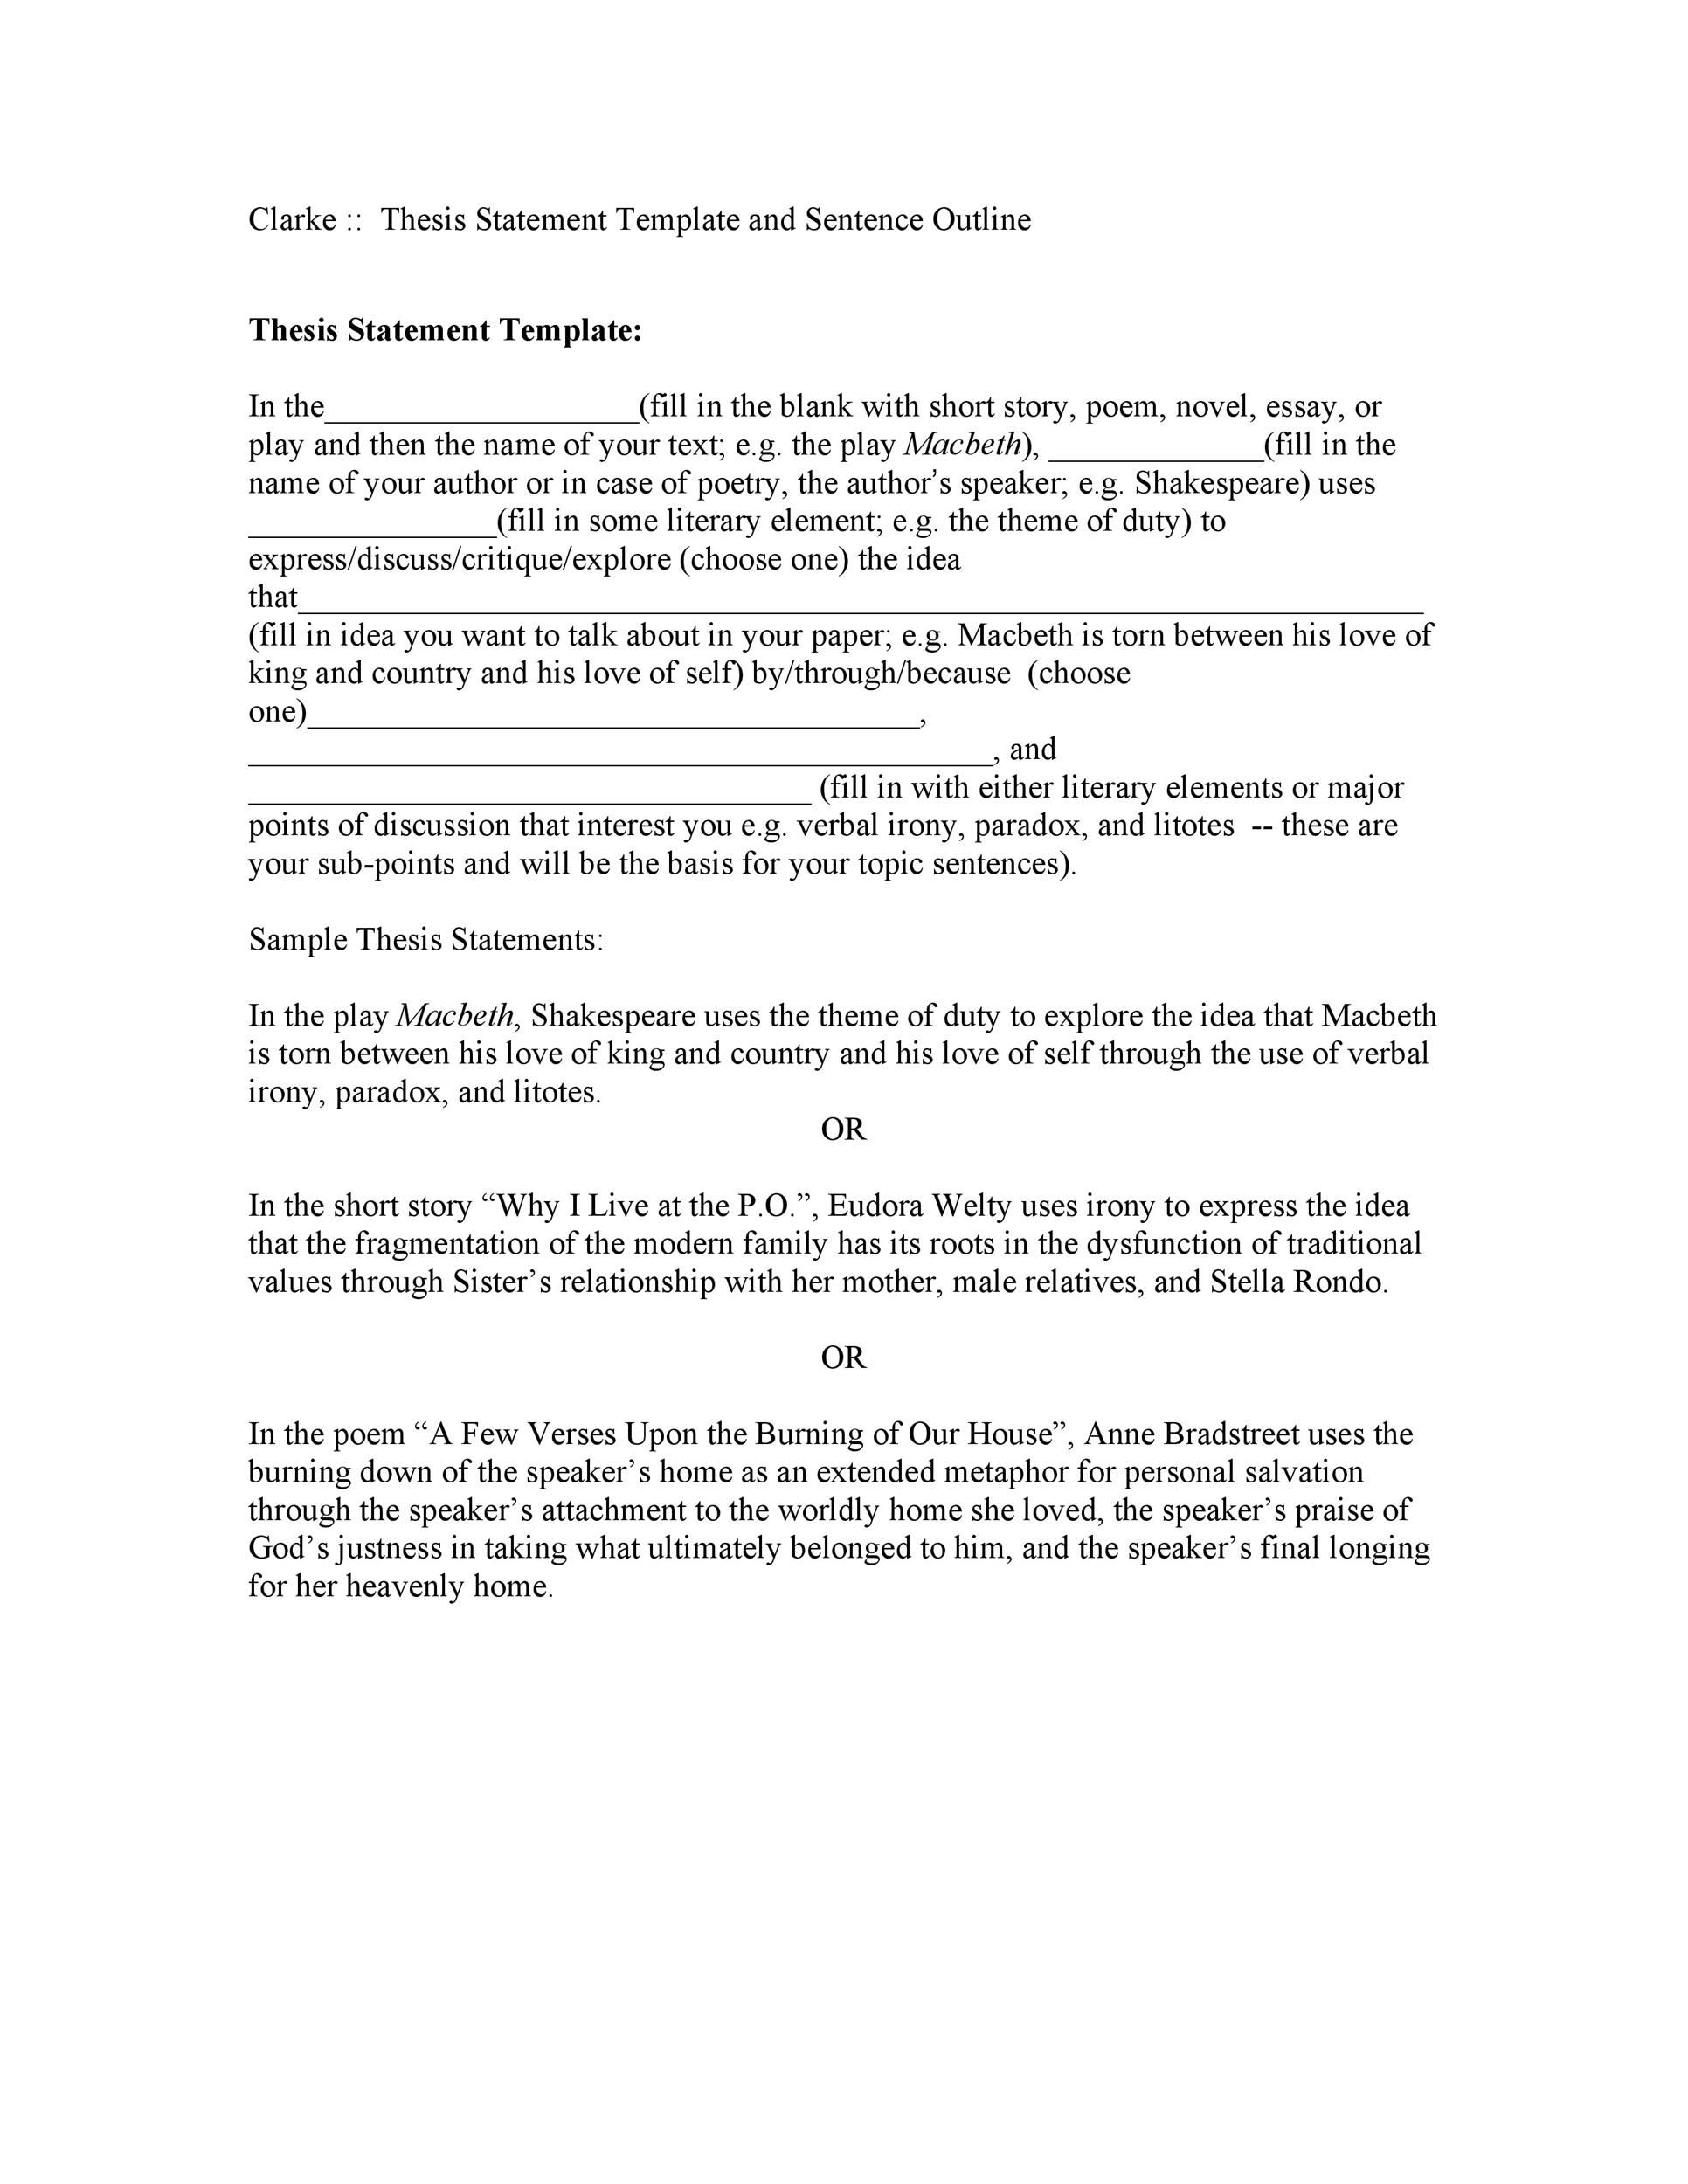 example essay thesis statement